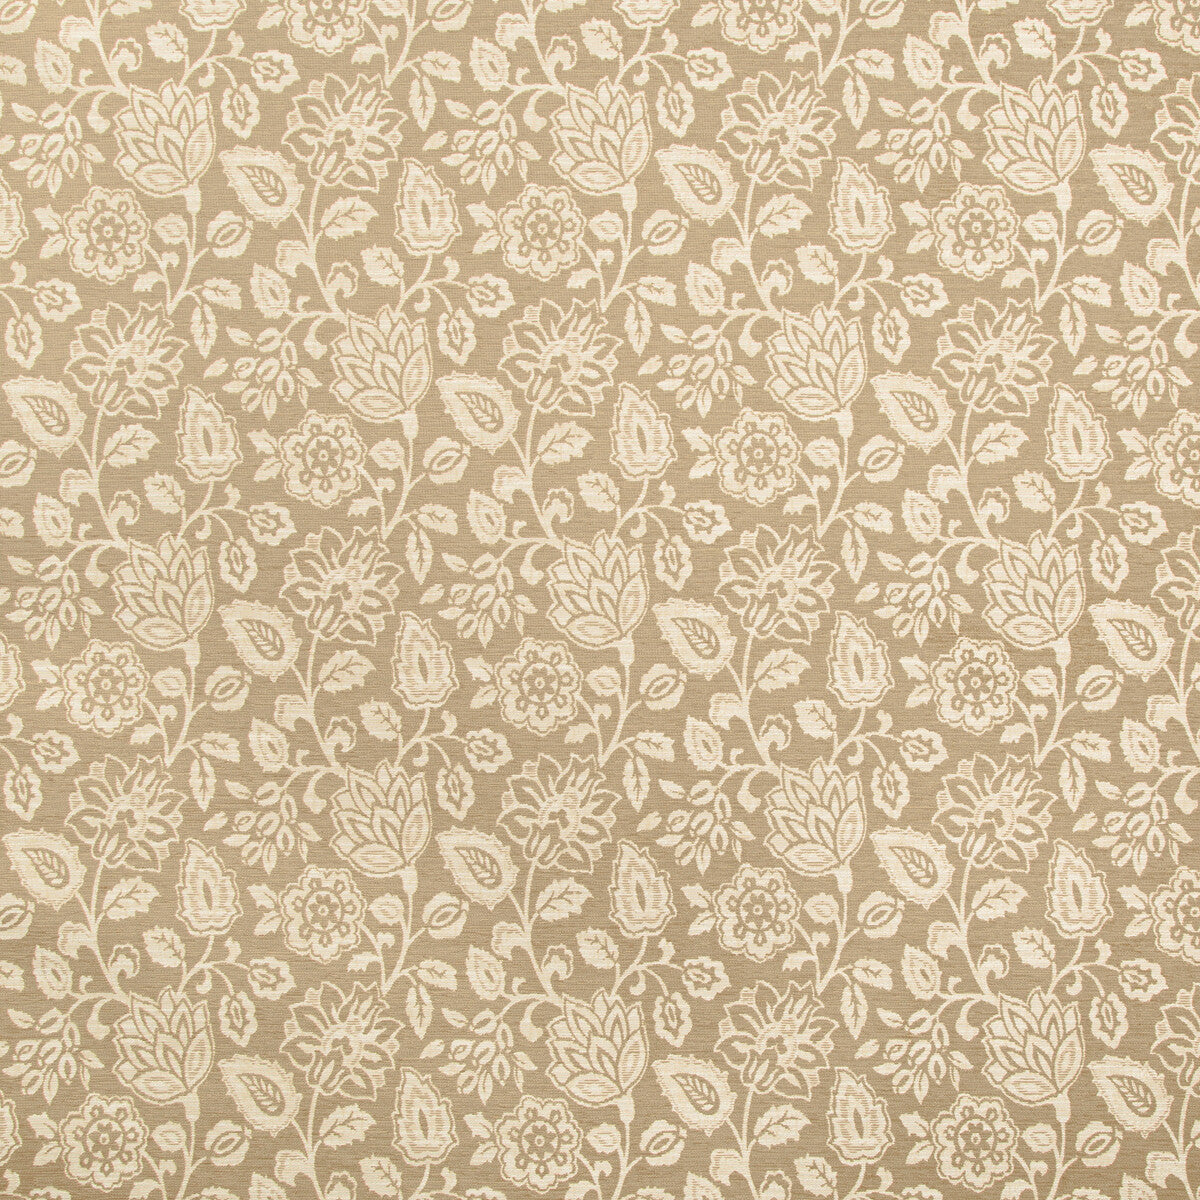 Kf Ctr fabric - pattern 35863.16.0 - by Kravet Contract in the Gis Crypton collection